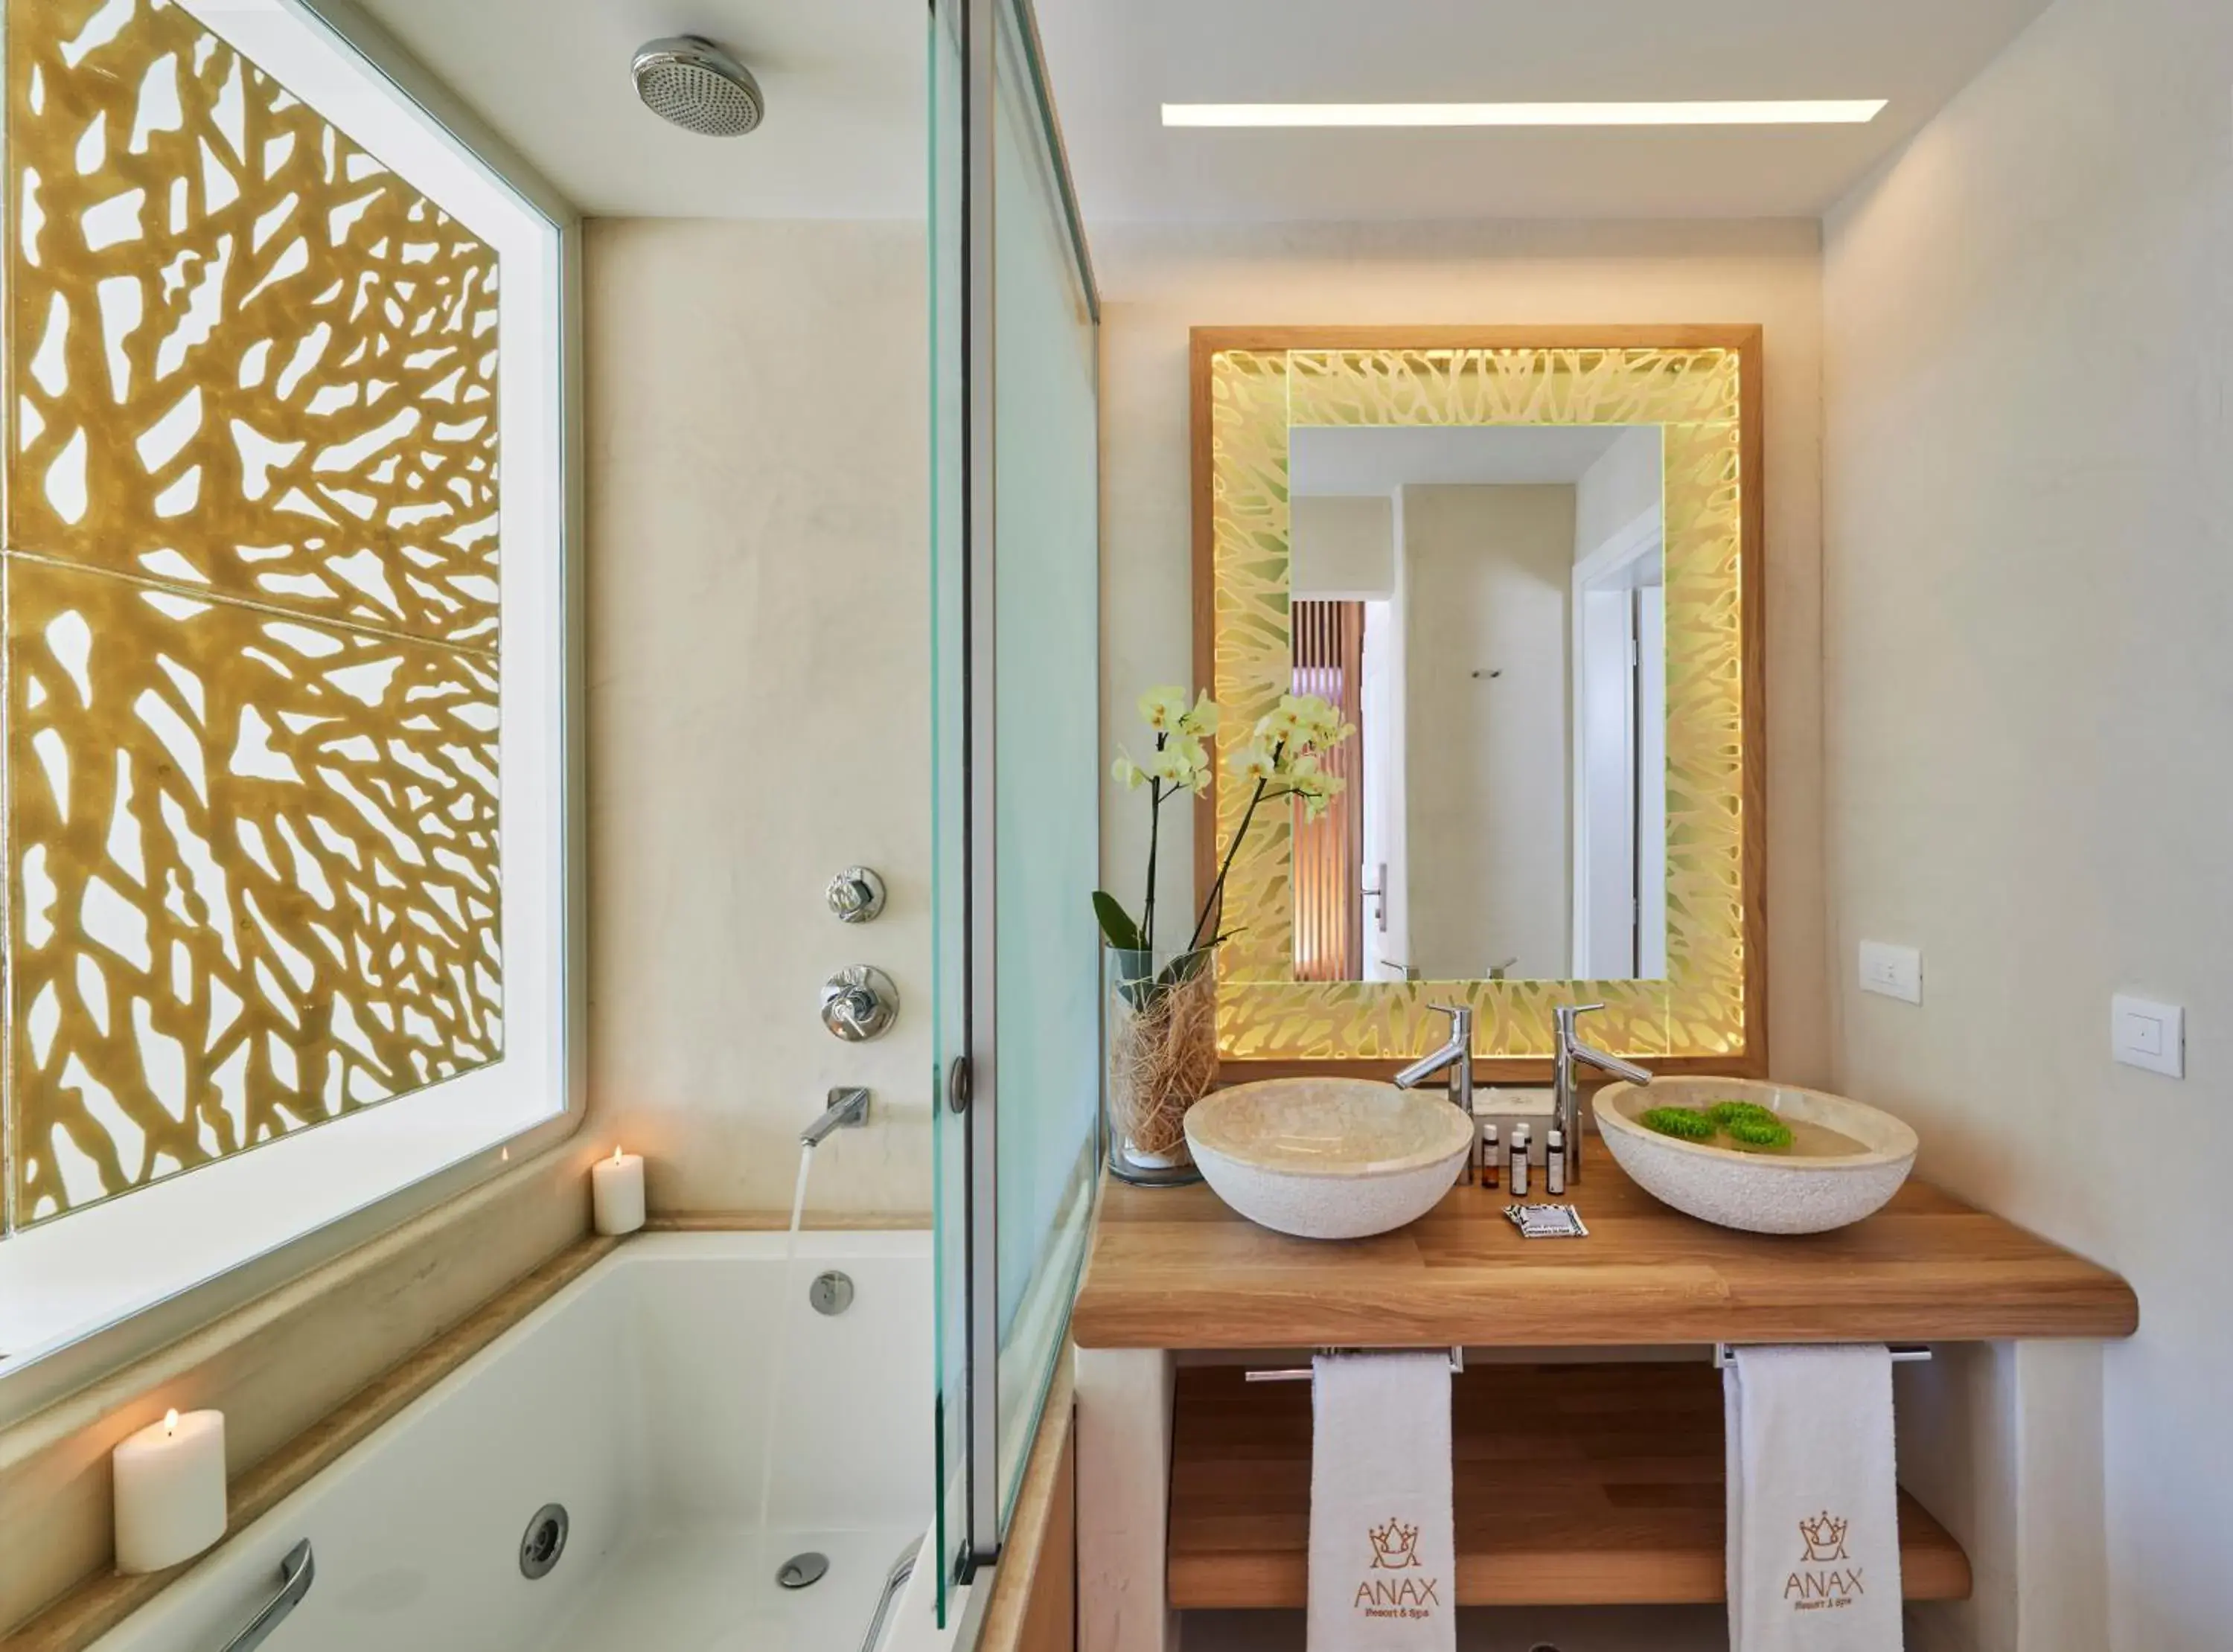 Bathroom, Dining Area in Anax Resort and Spa